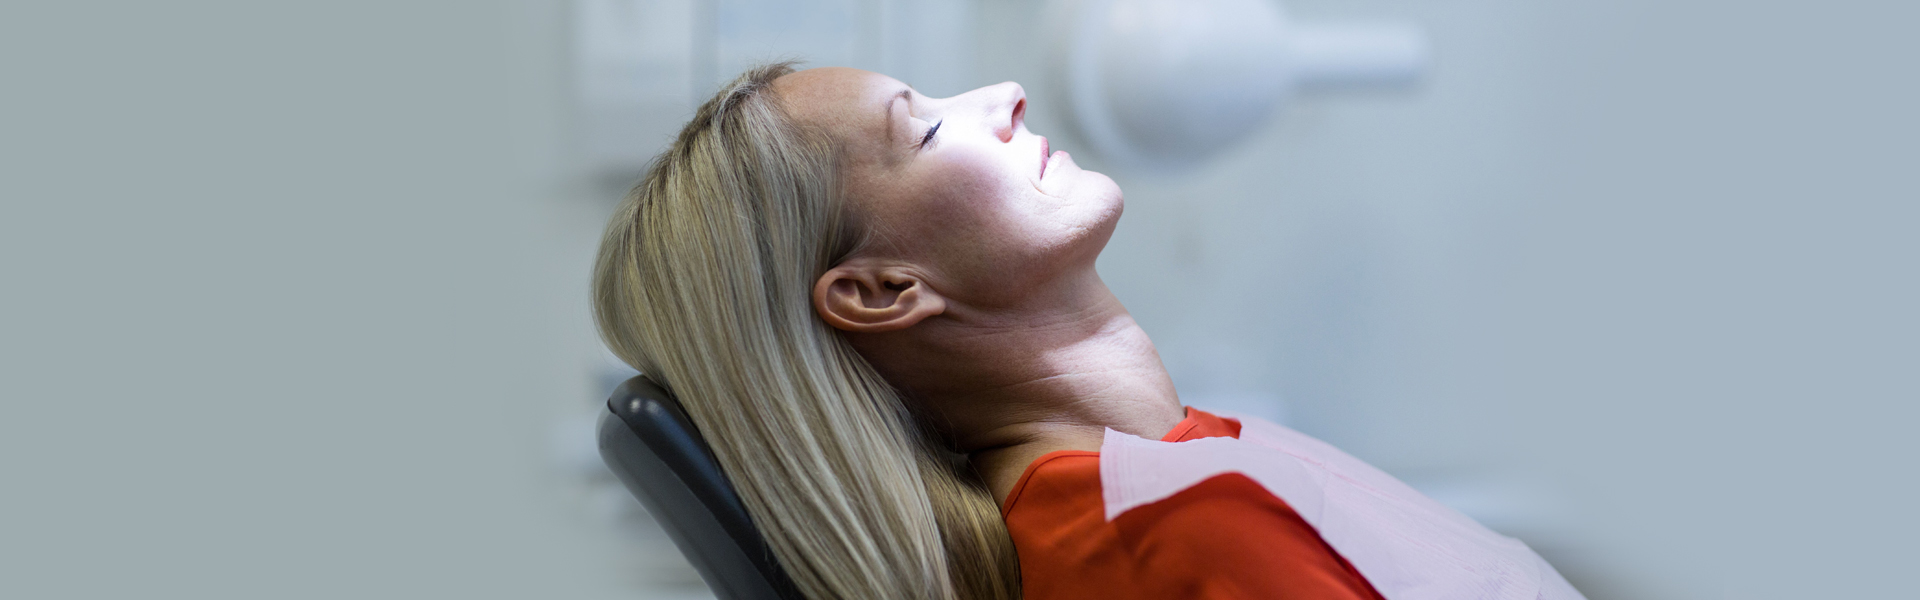 Differences between General Anesthesia and Sedation